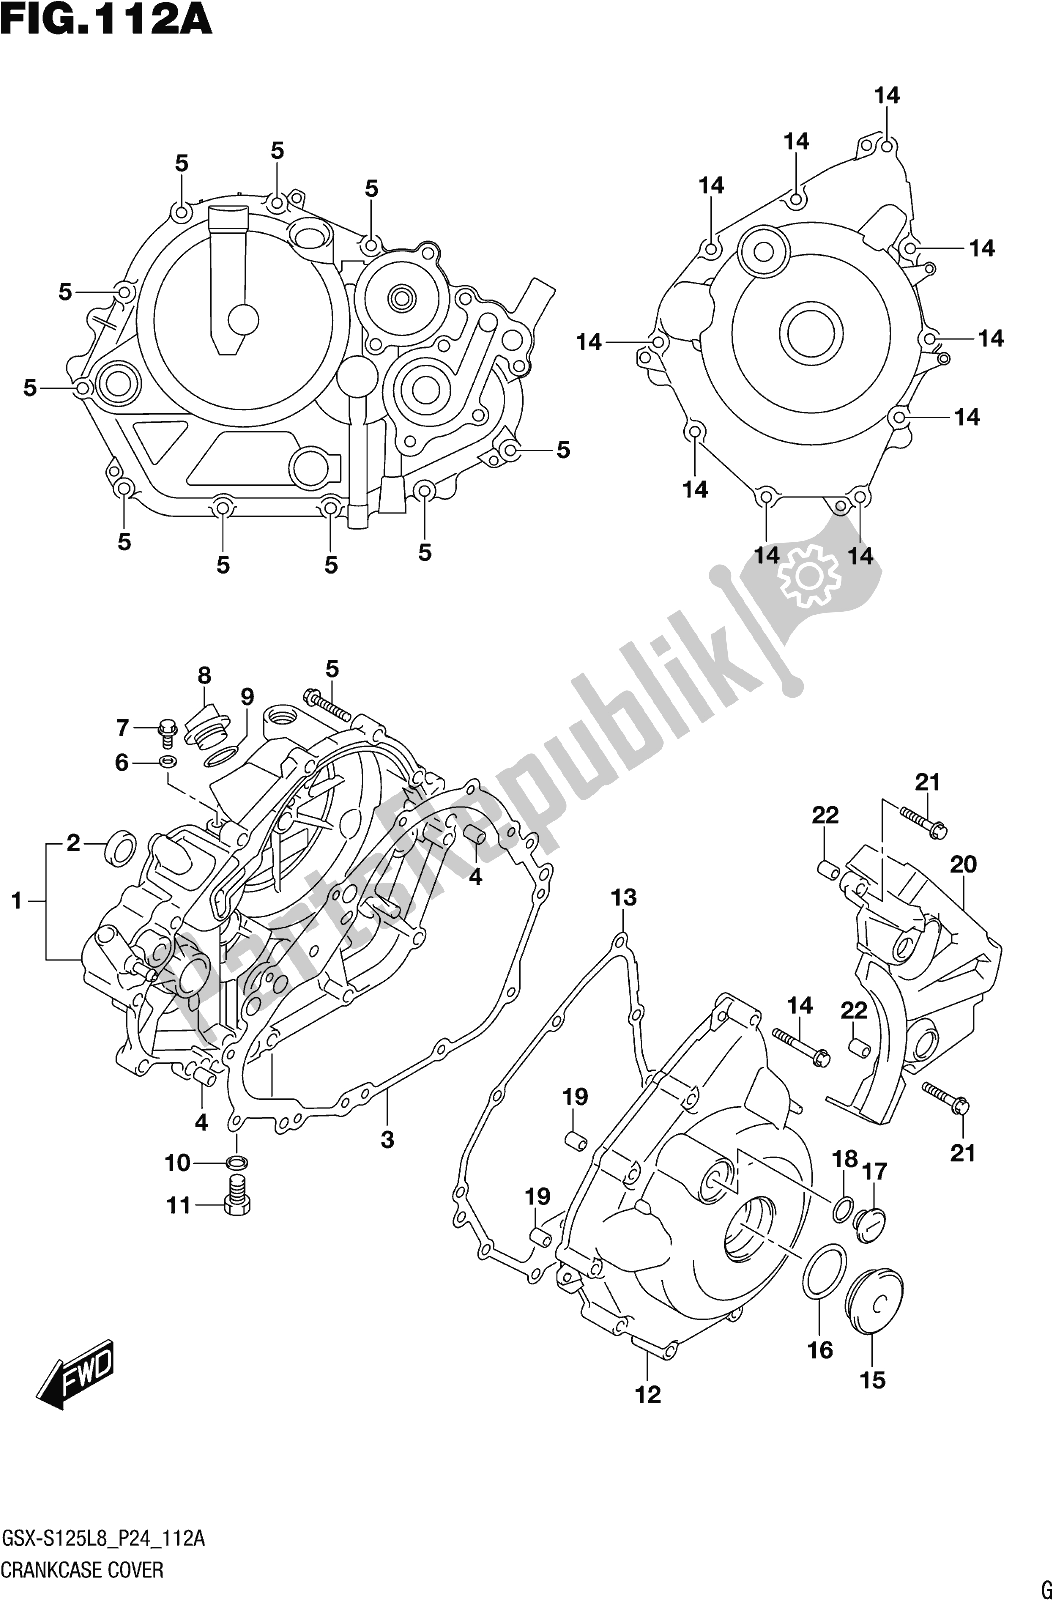 All parts for the Fig. 112a Crankcase Cover of the Suzuki Gsx-s 125 ML 2018